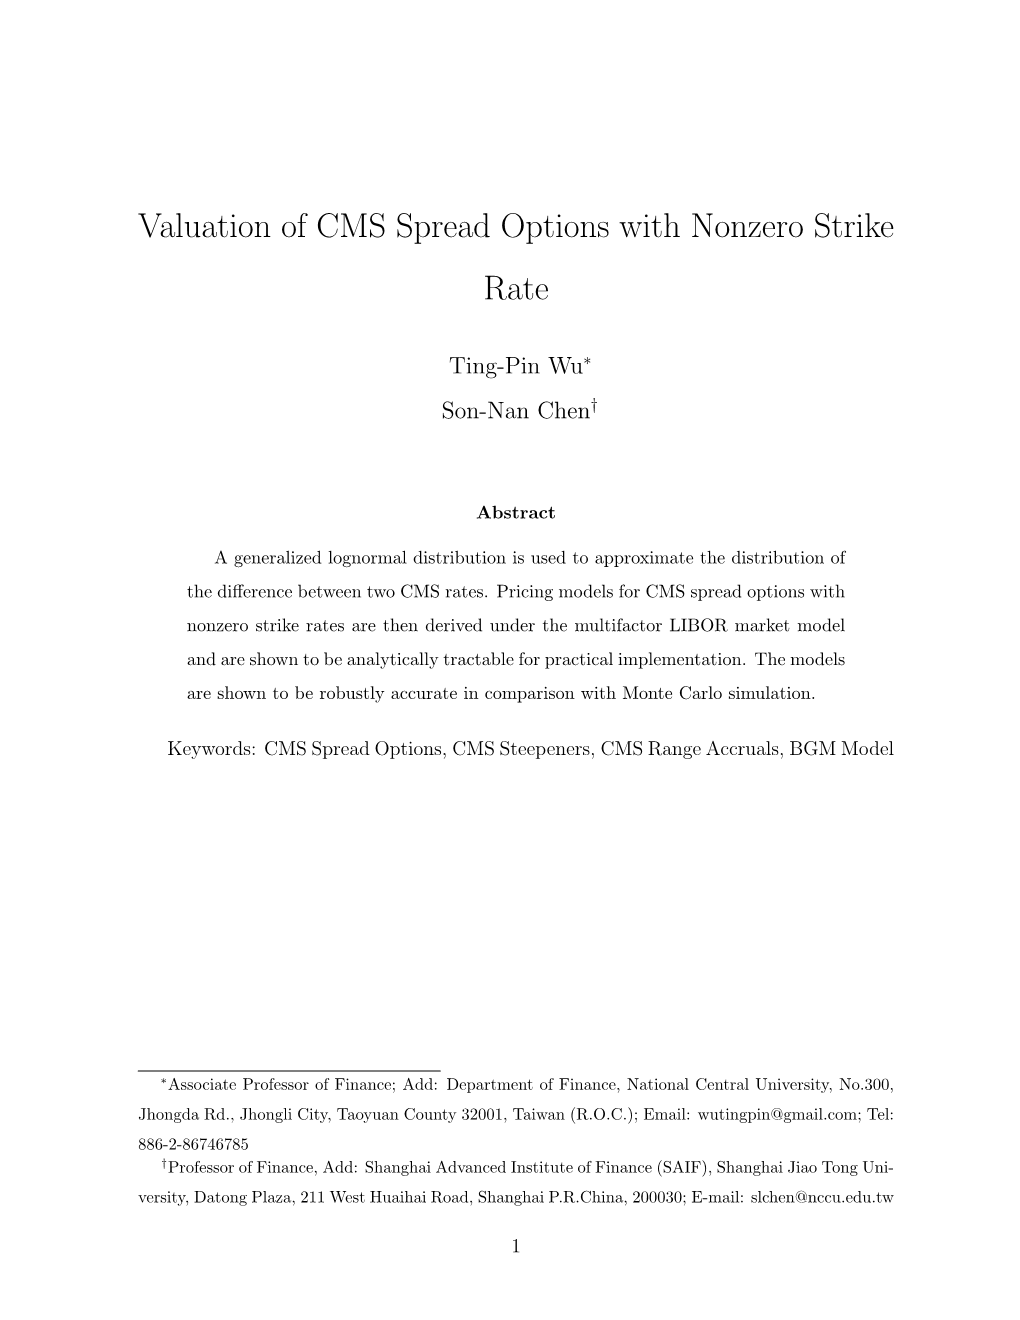 Valuation of CMS Spread Options with Nonzero Strike Rate